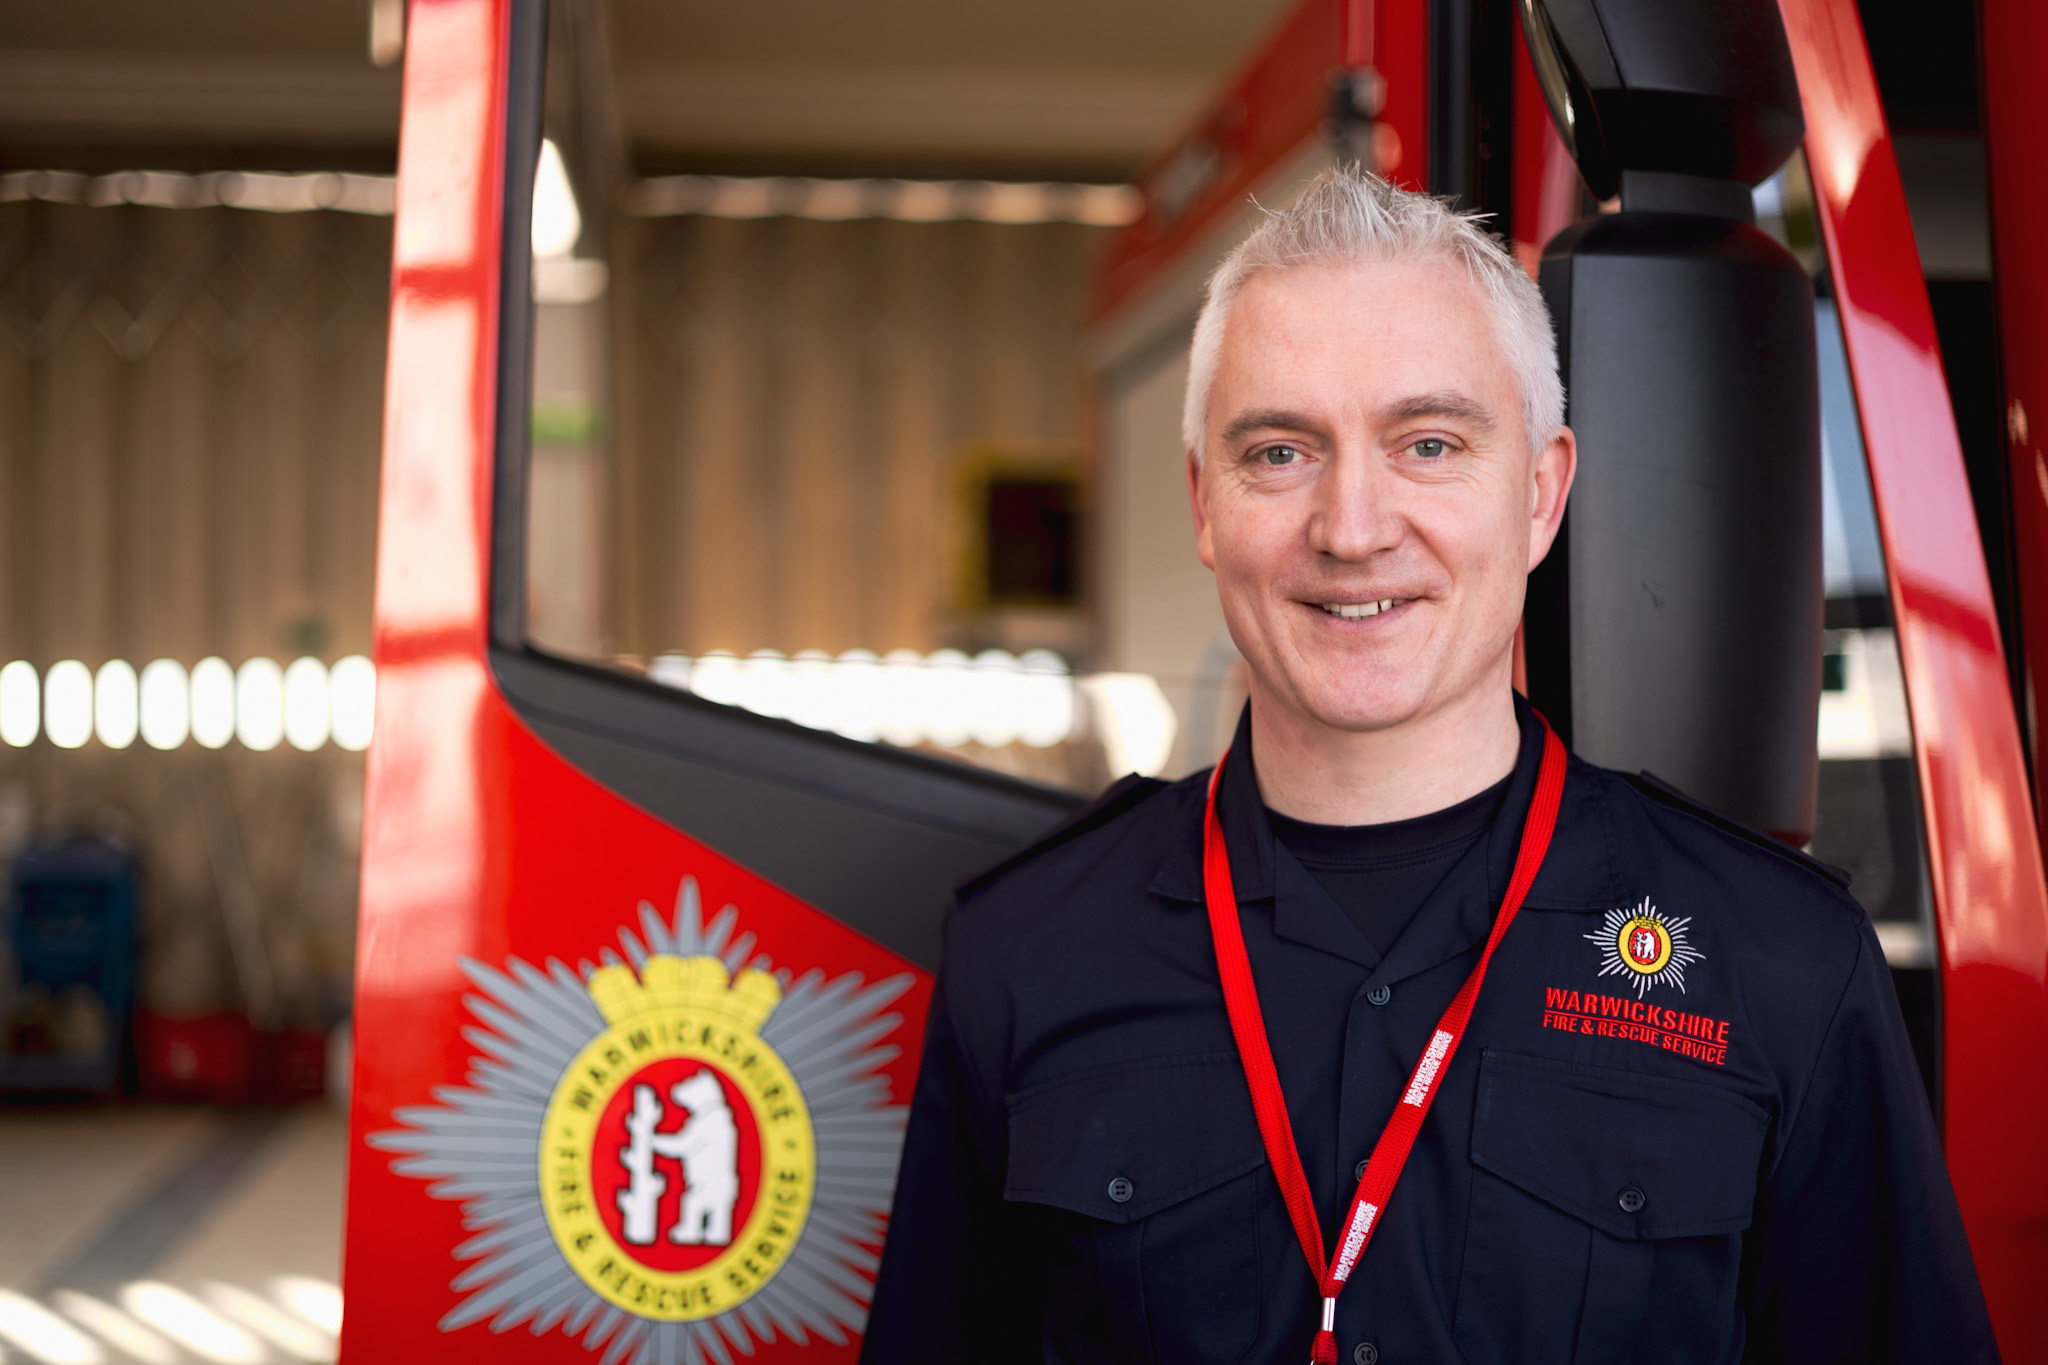 WFRS Chief Fire Officer